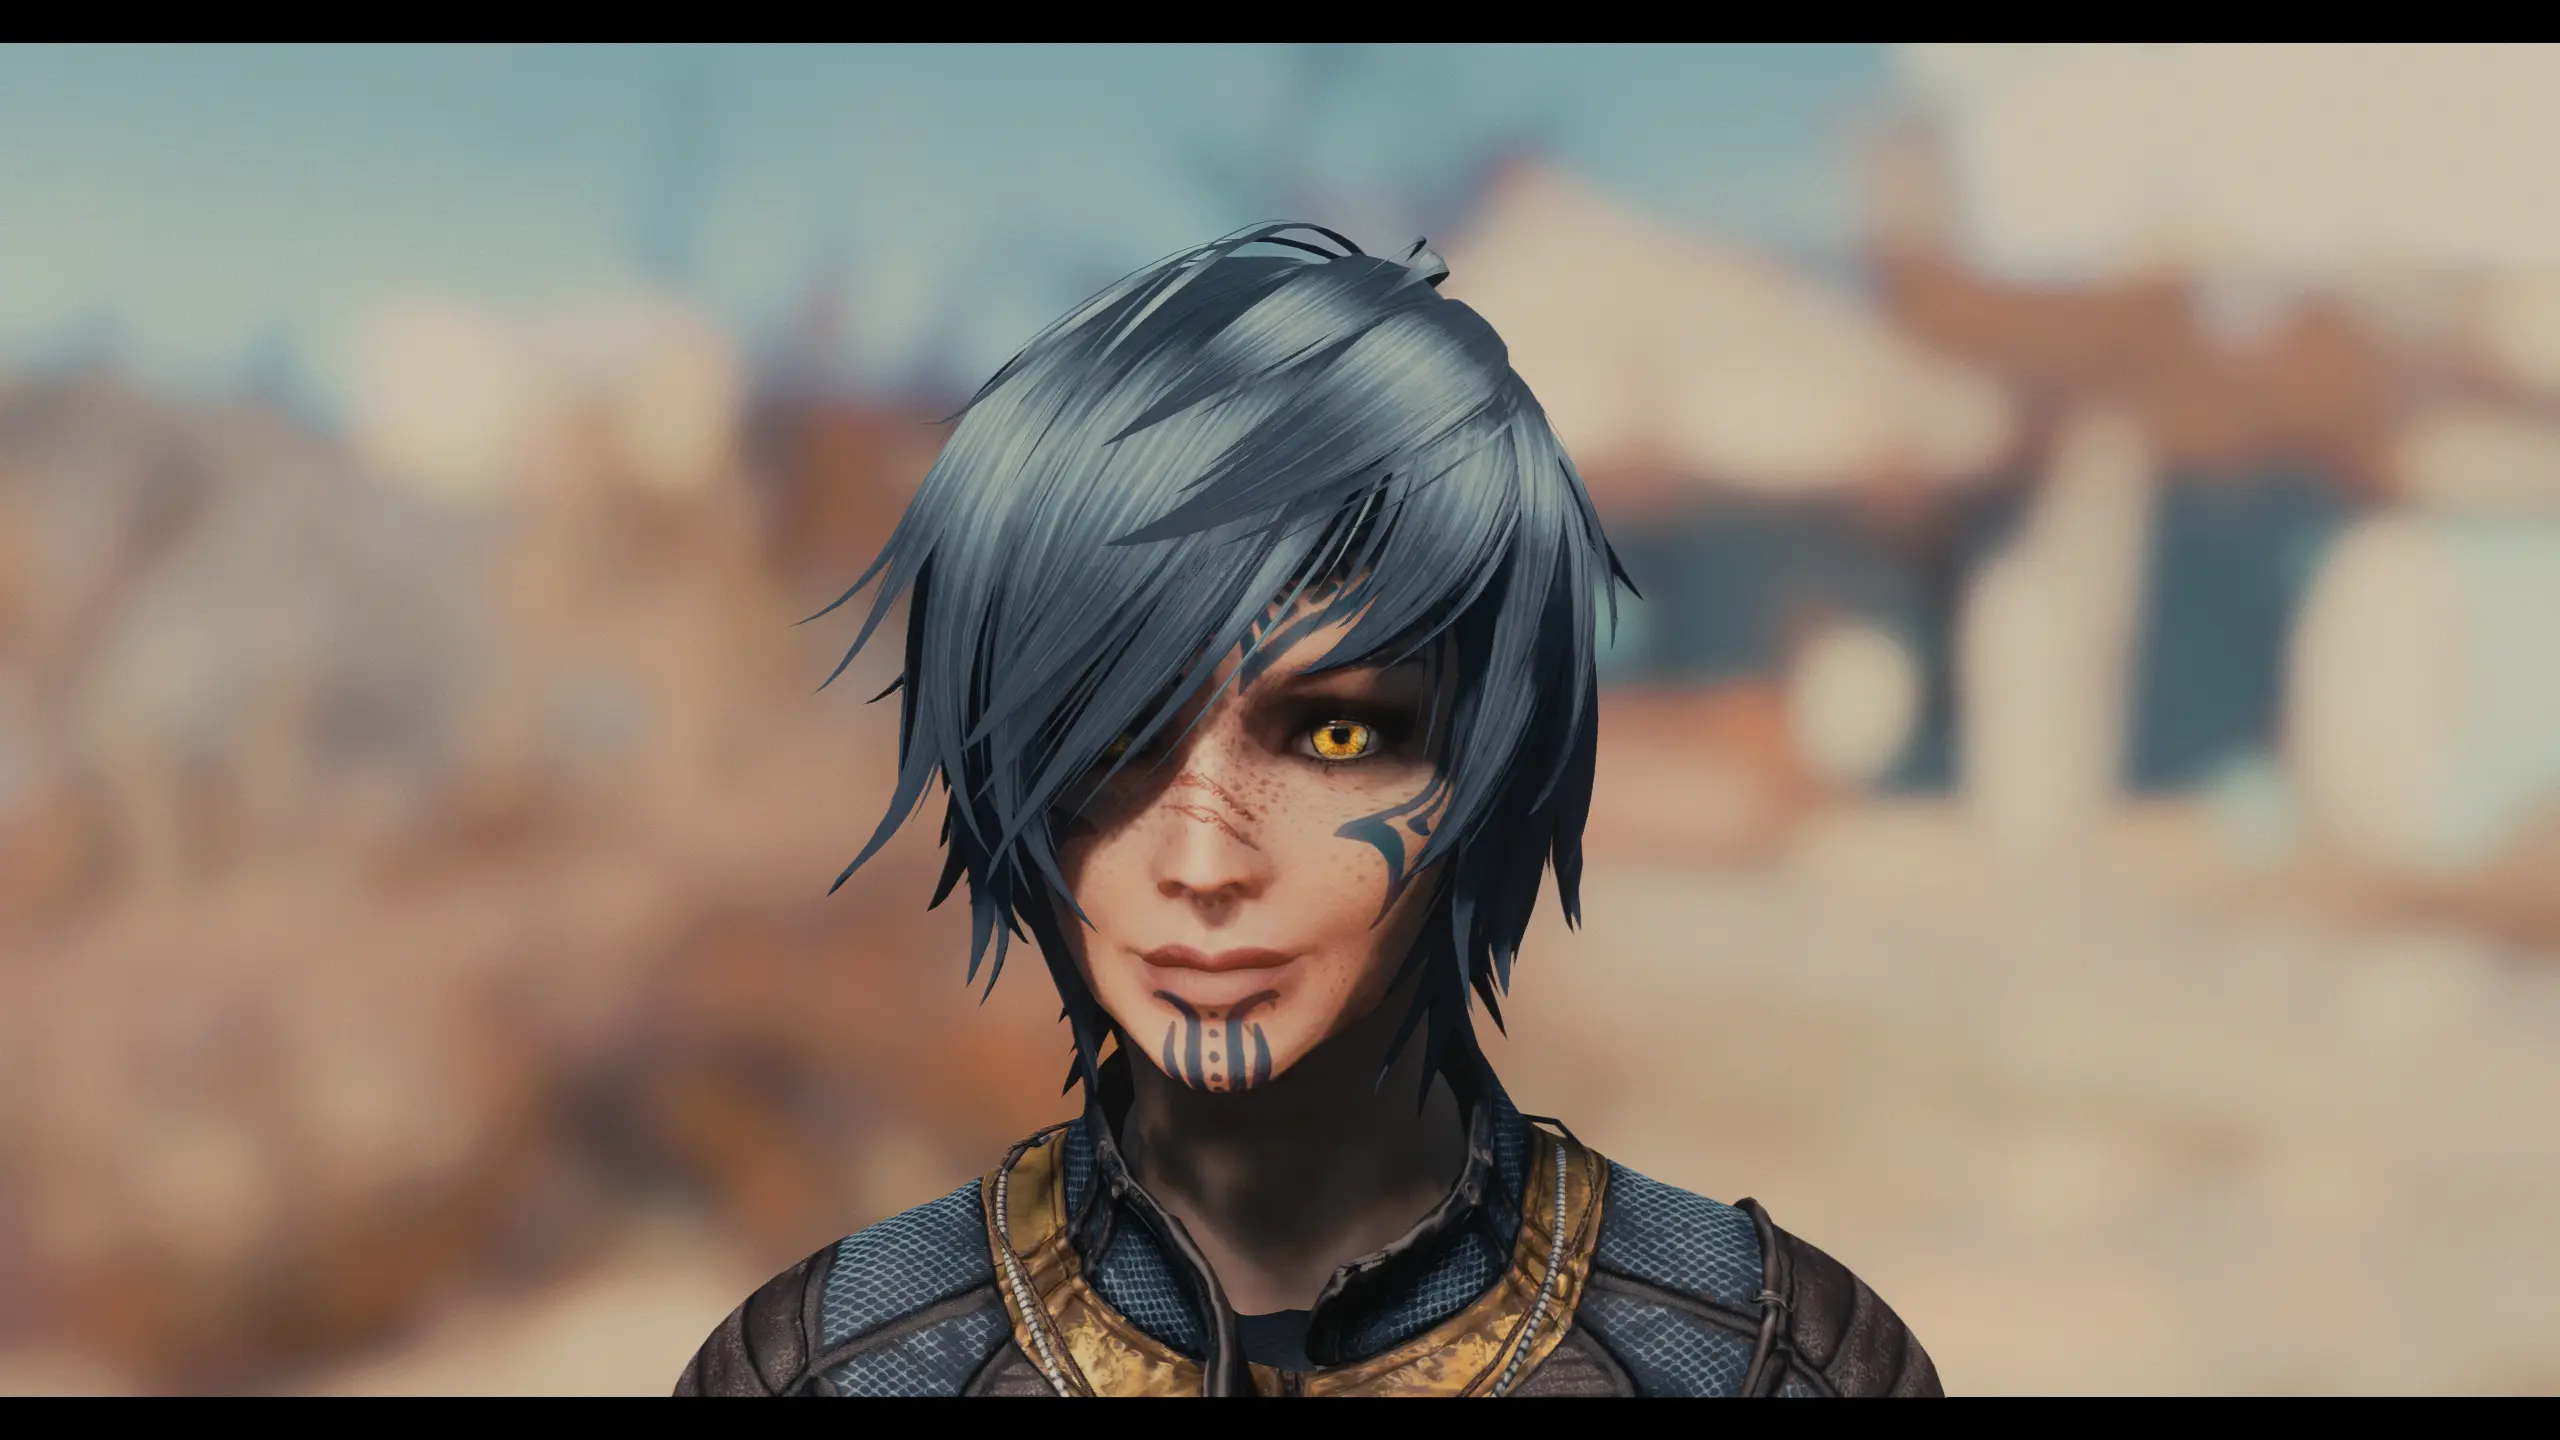 Blue Hair Mod for Fallout 4 - wide 8